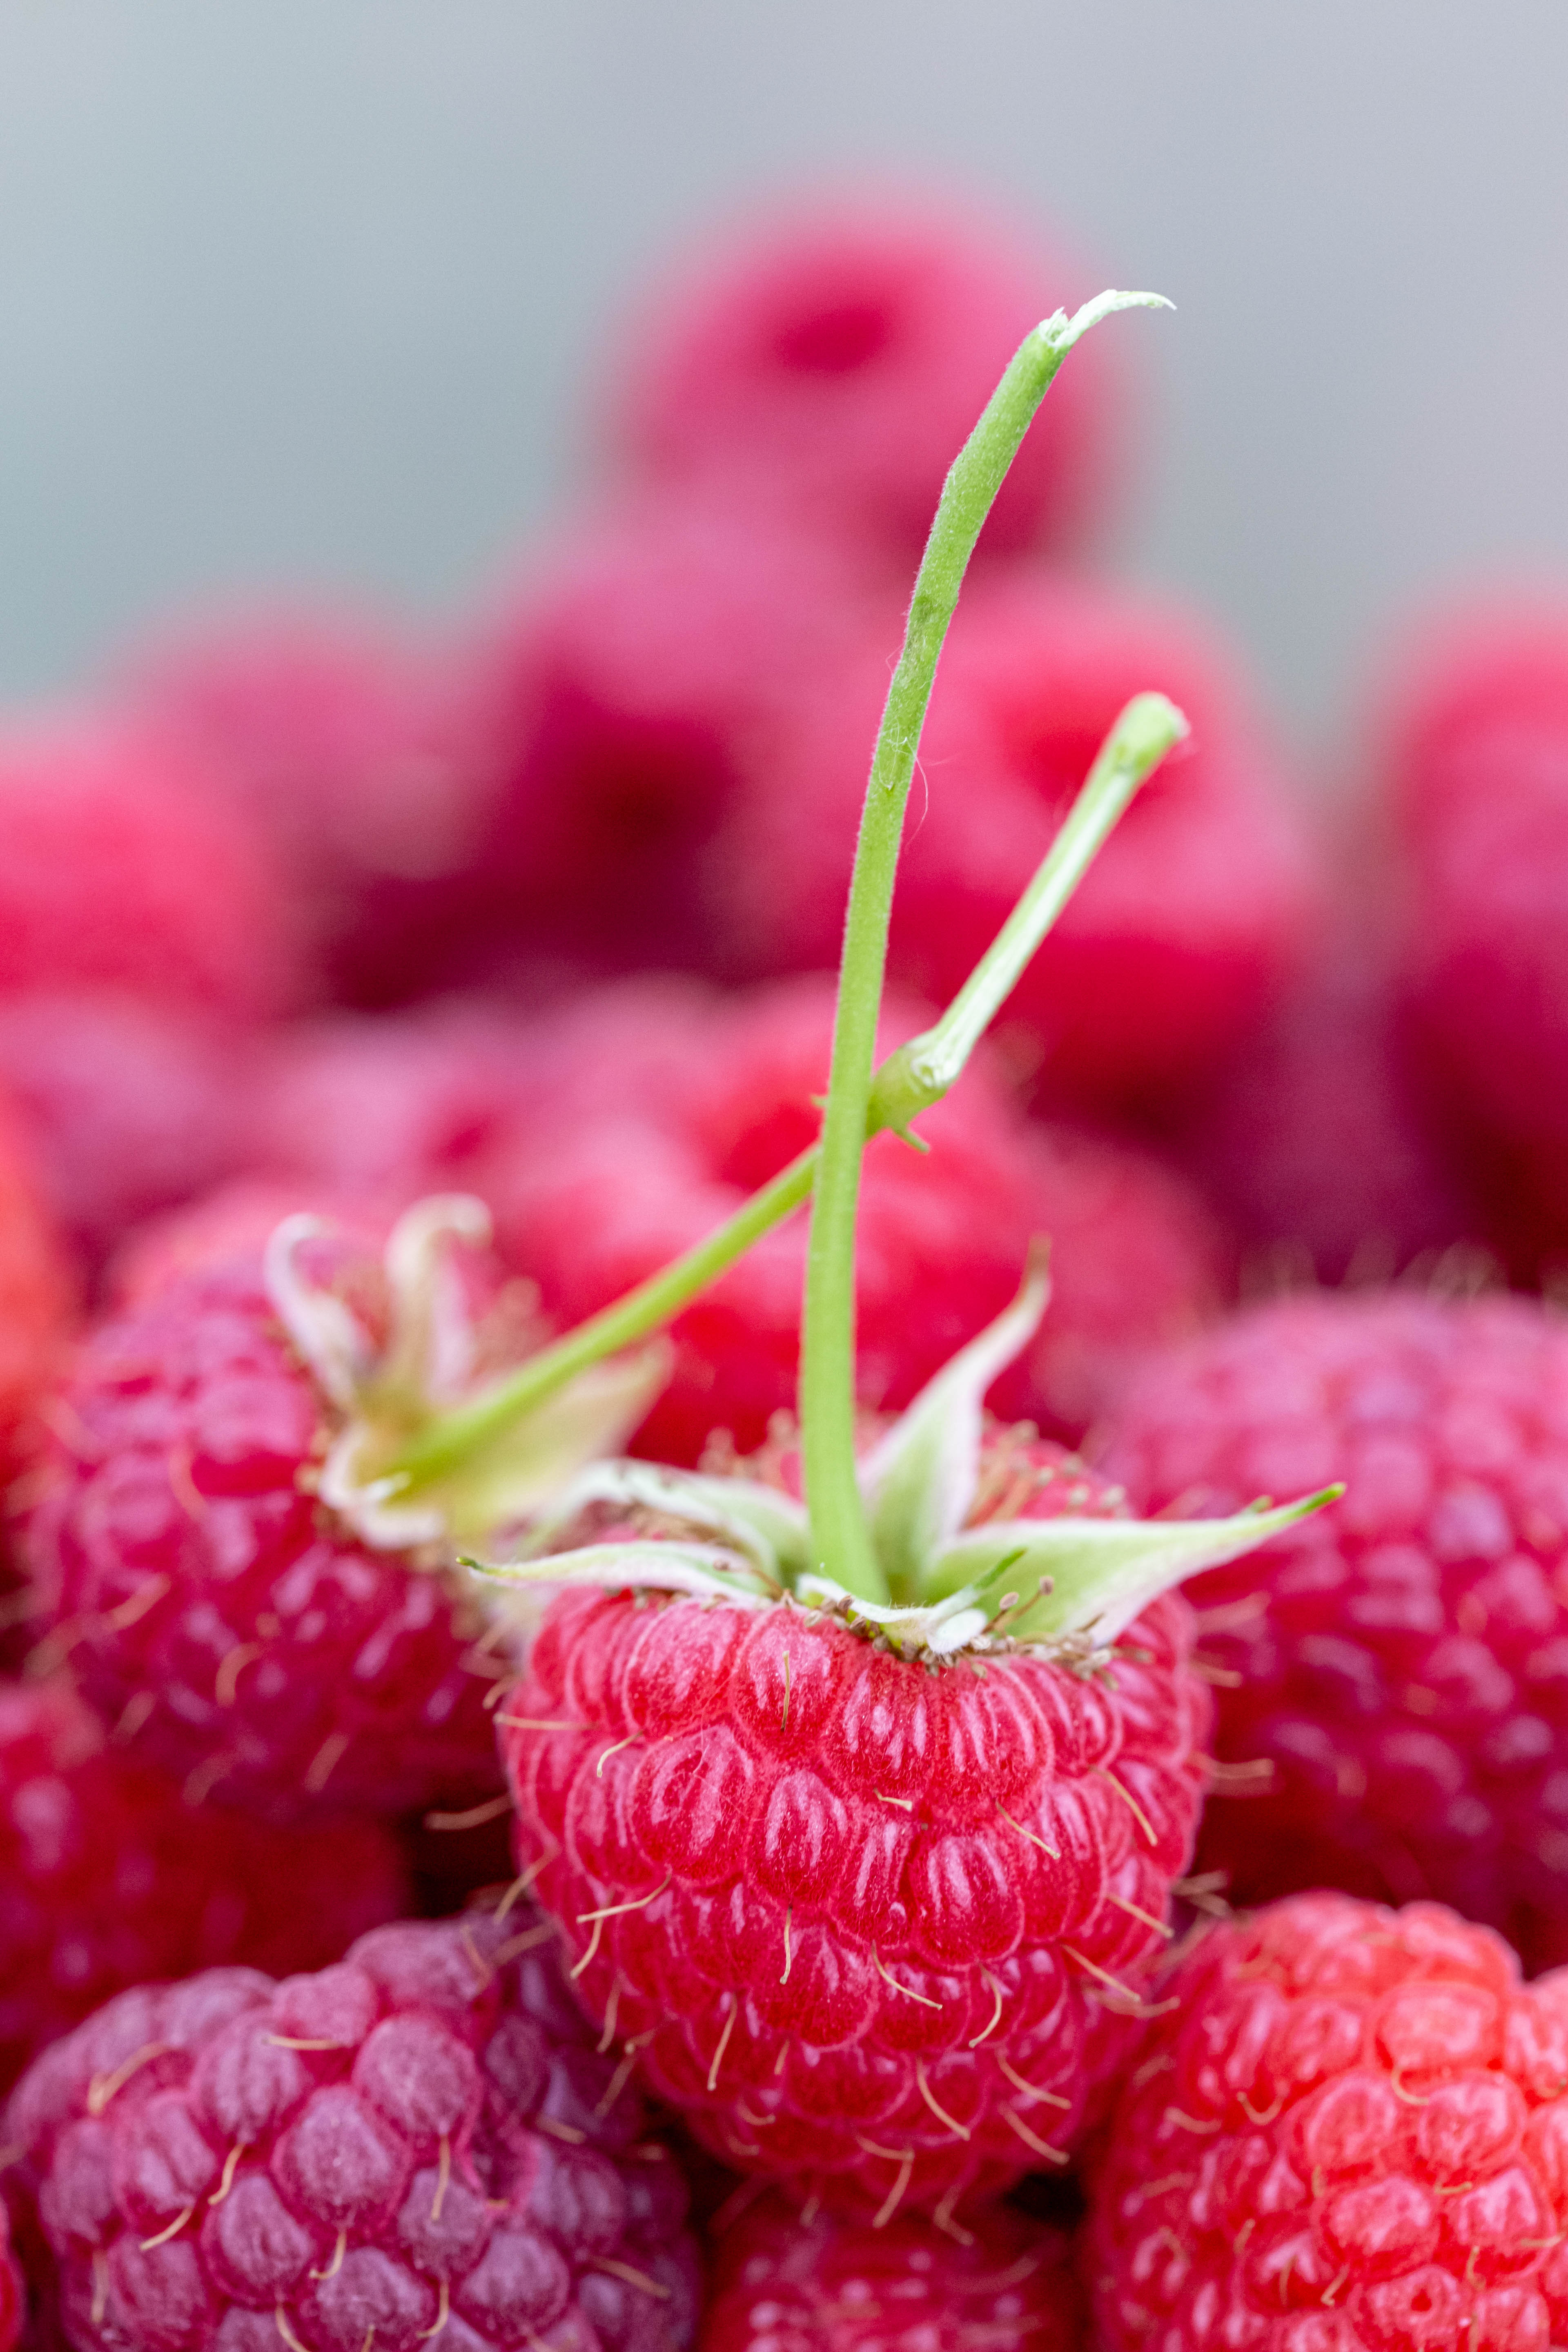 76255 download wallpaper food, raspberry, berries, close-up, ripe, juicy screensavers and pictures for free